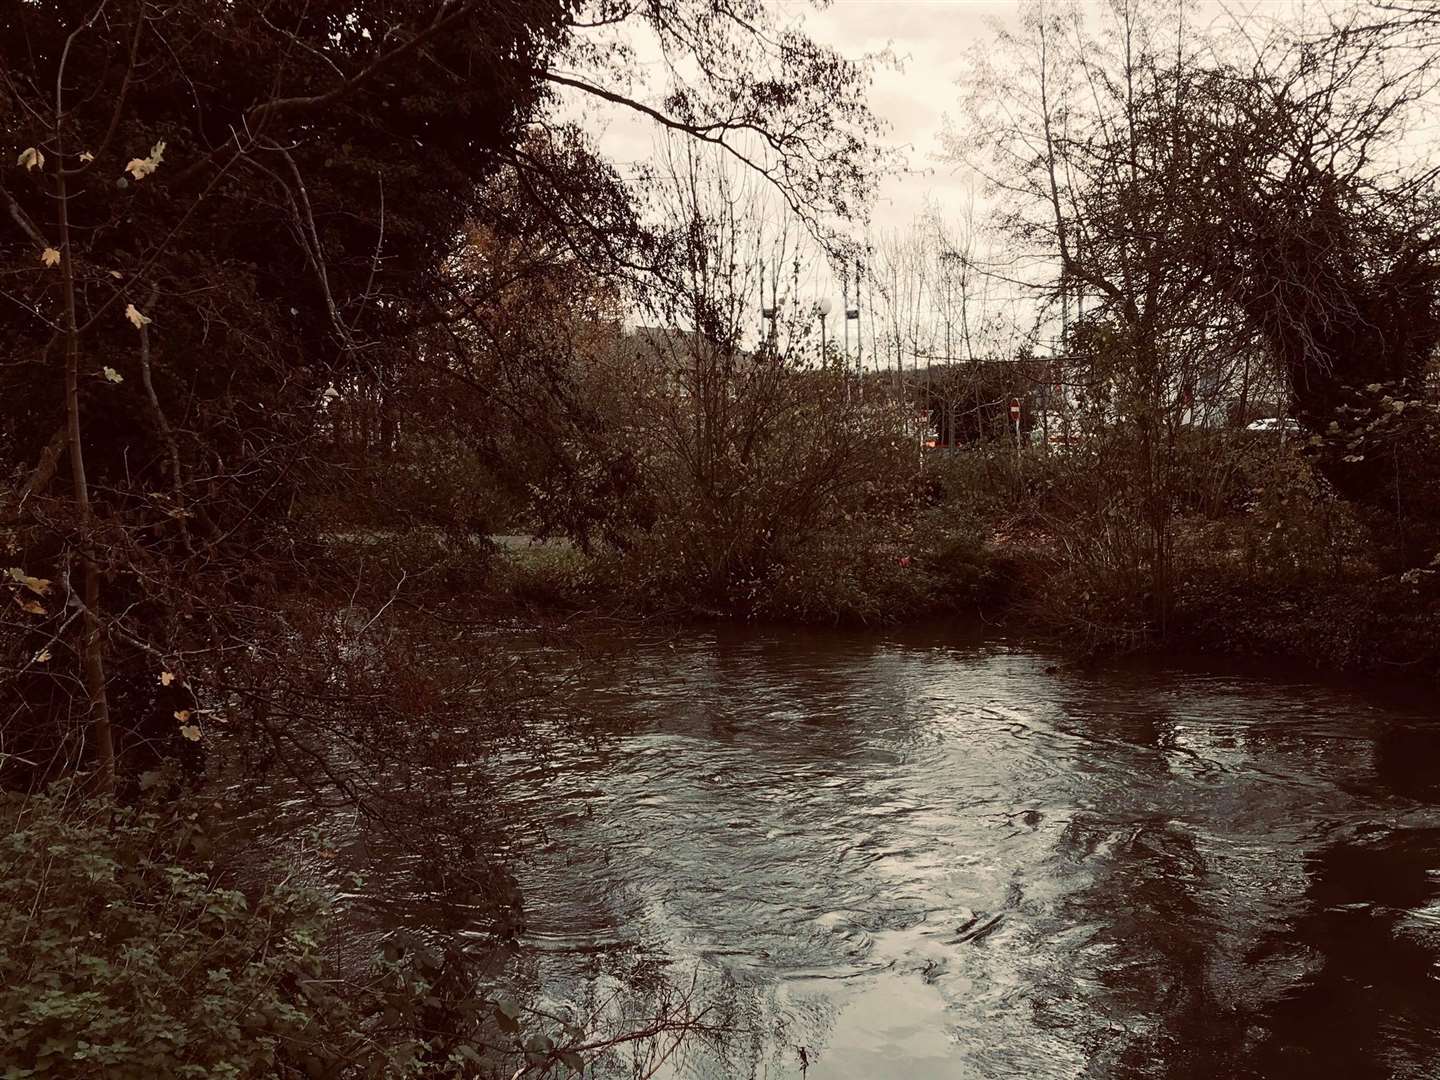 The spot where the group was targeting ducks on the River Stour